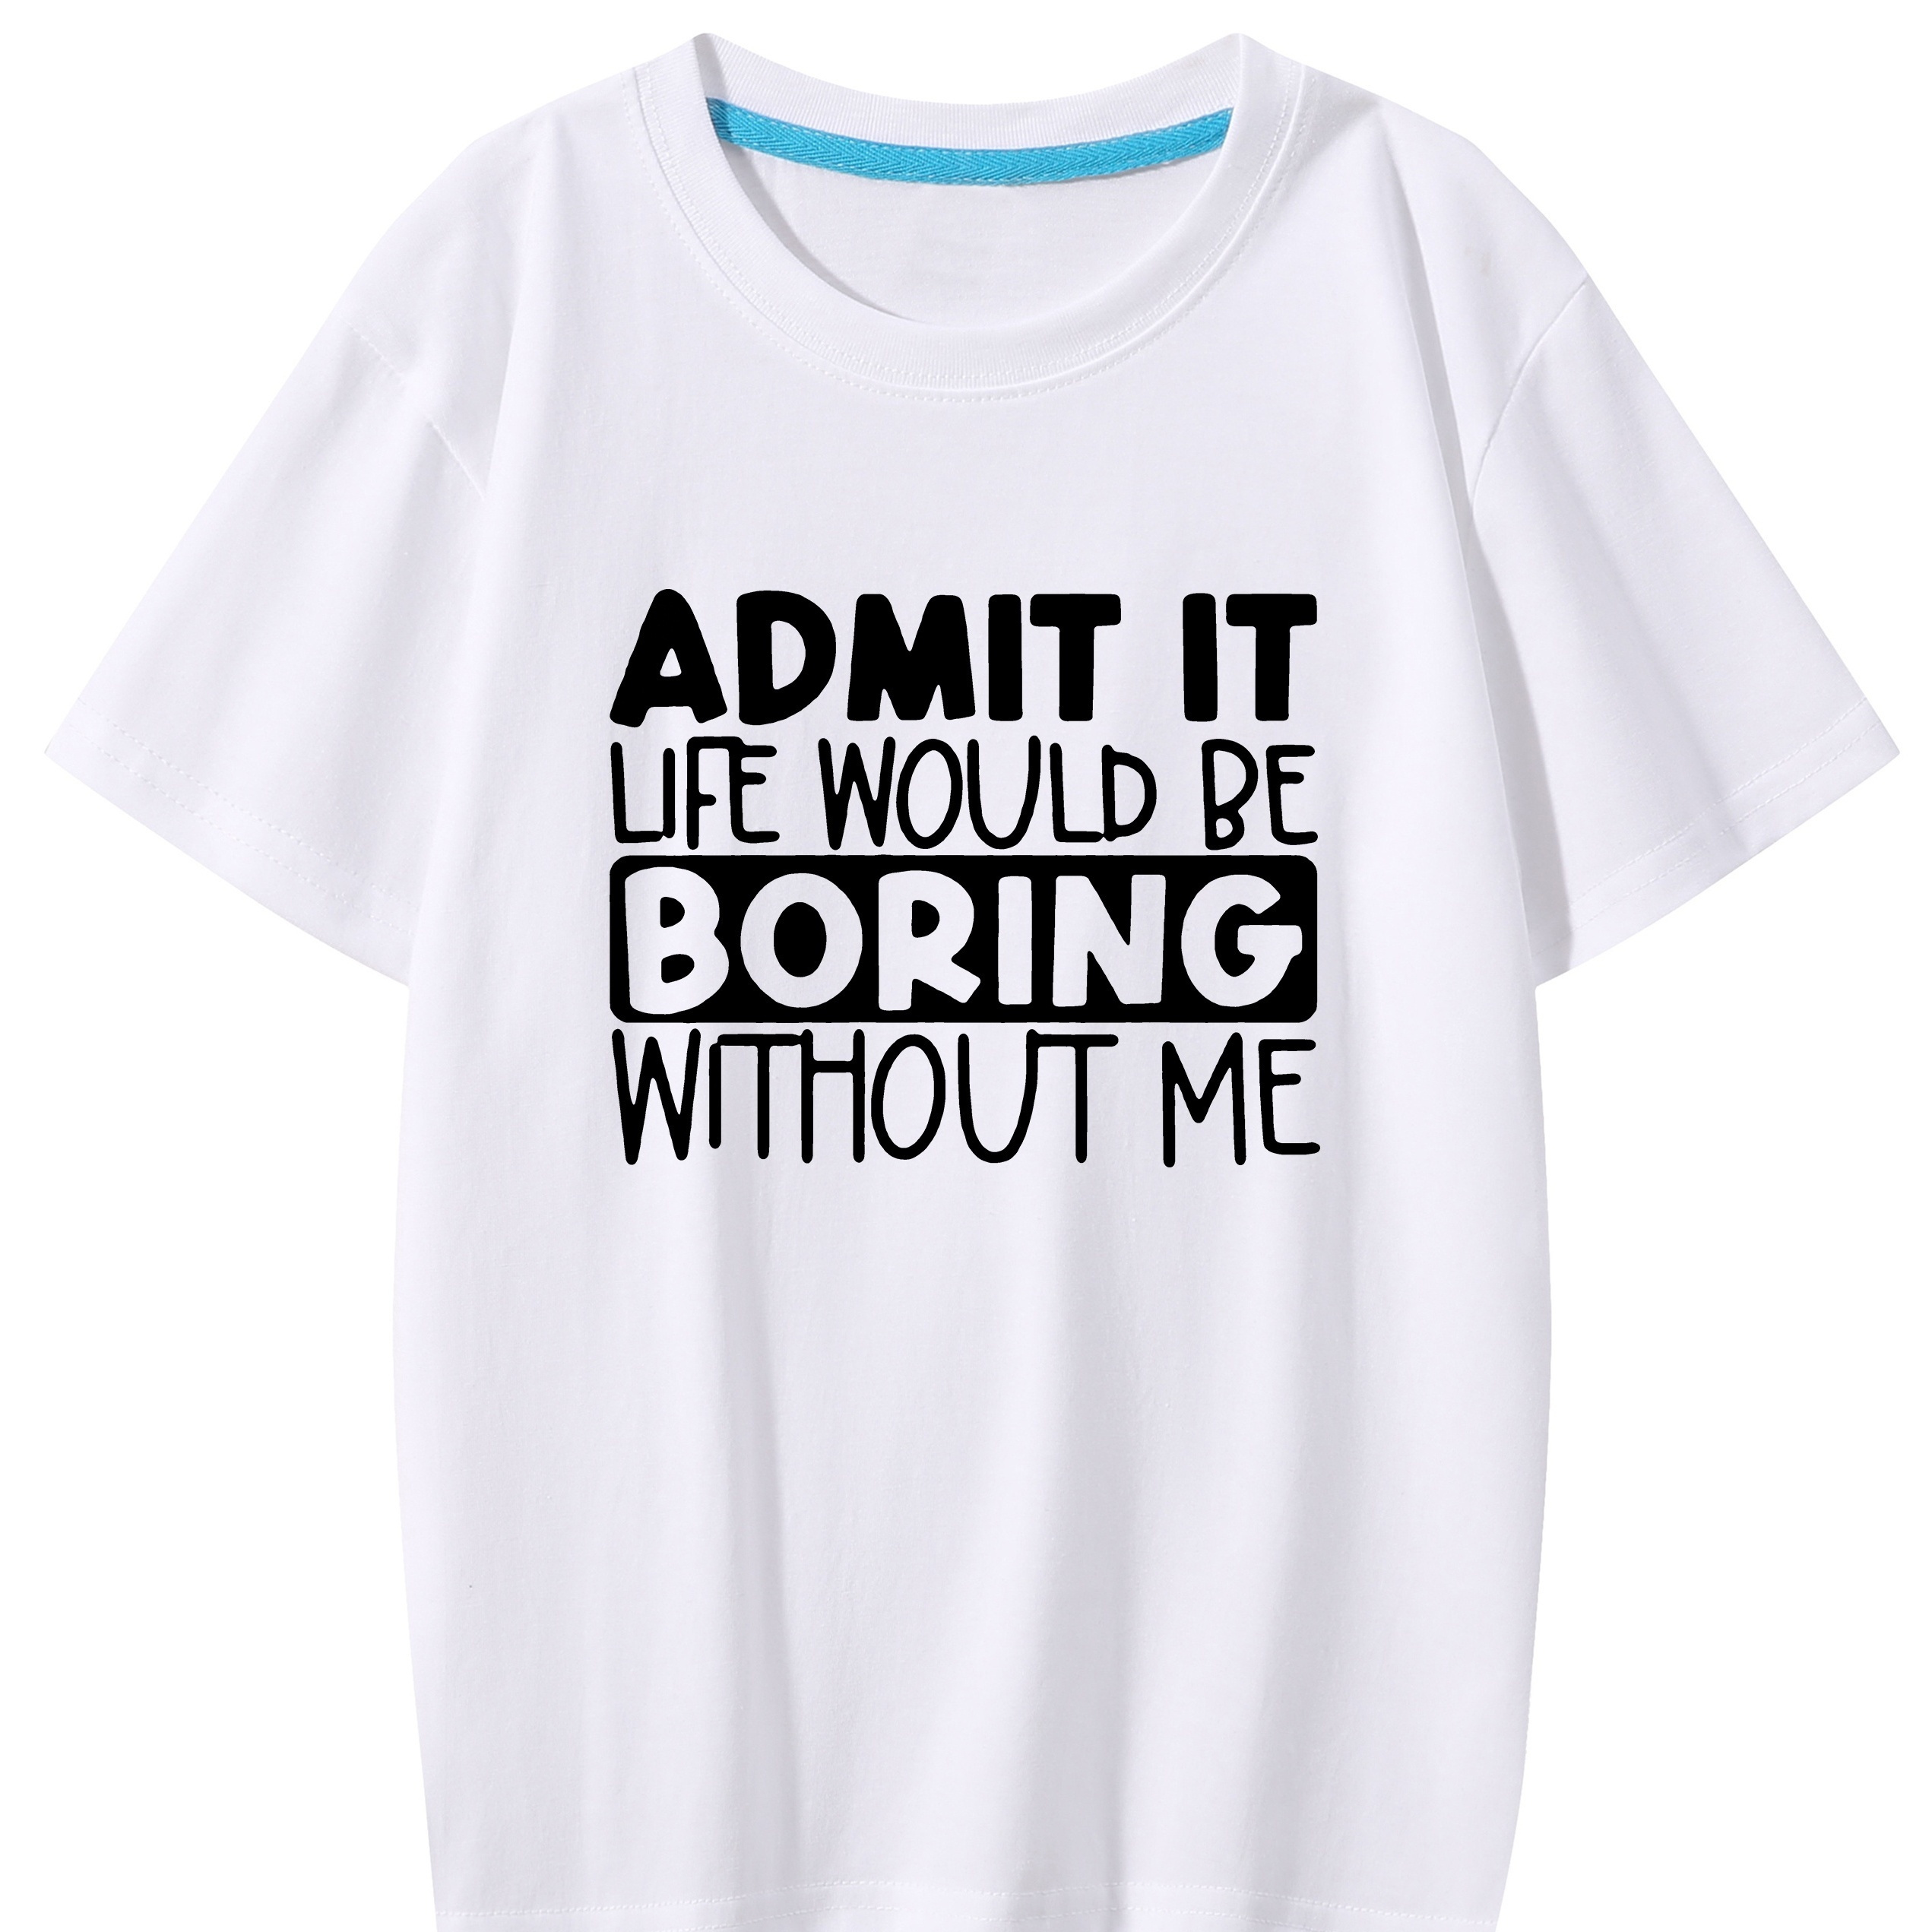 

Admit It Life Would Be Borning Without Me Letter Print Boys Creative T-shirt, Casual Lightweight Comfy Short Sleeve Tee Tops, Kids Clothings For Summer